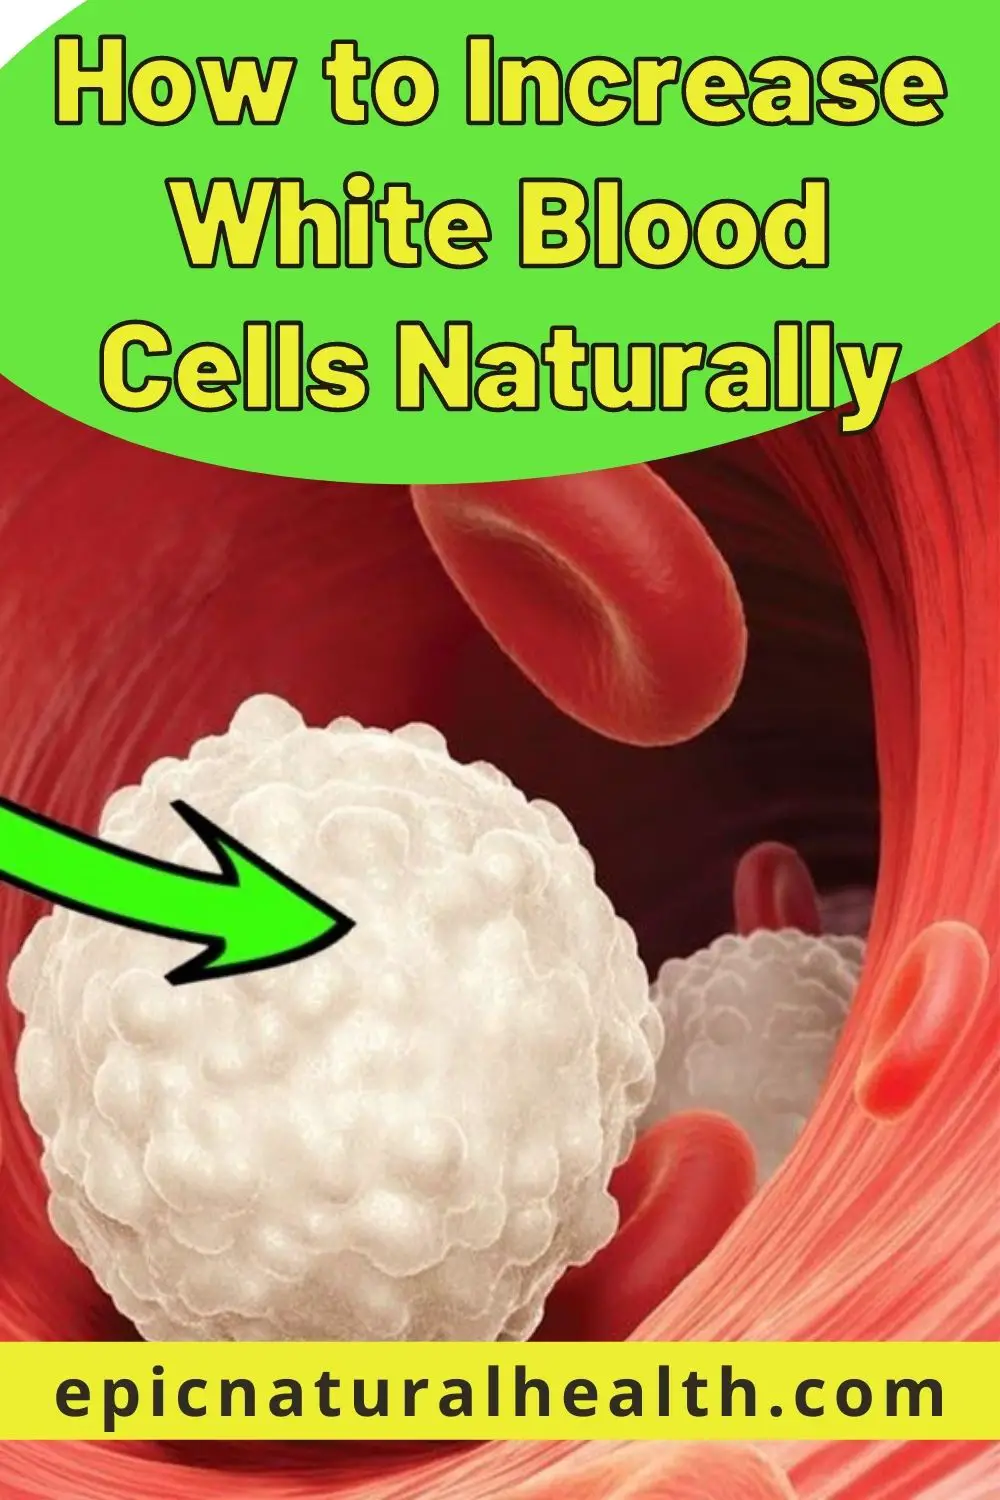 How to Increase White Blood Cells Naturally PIN